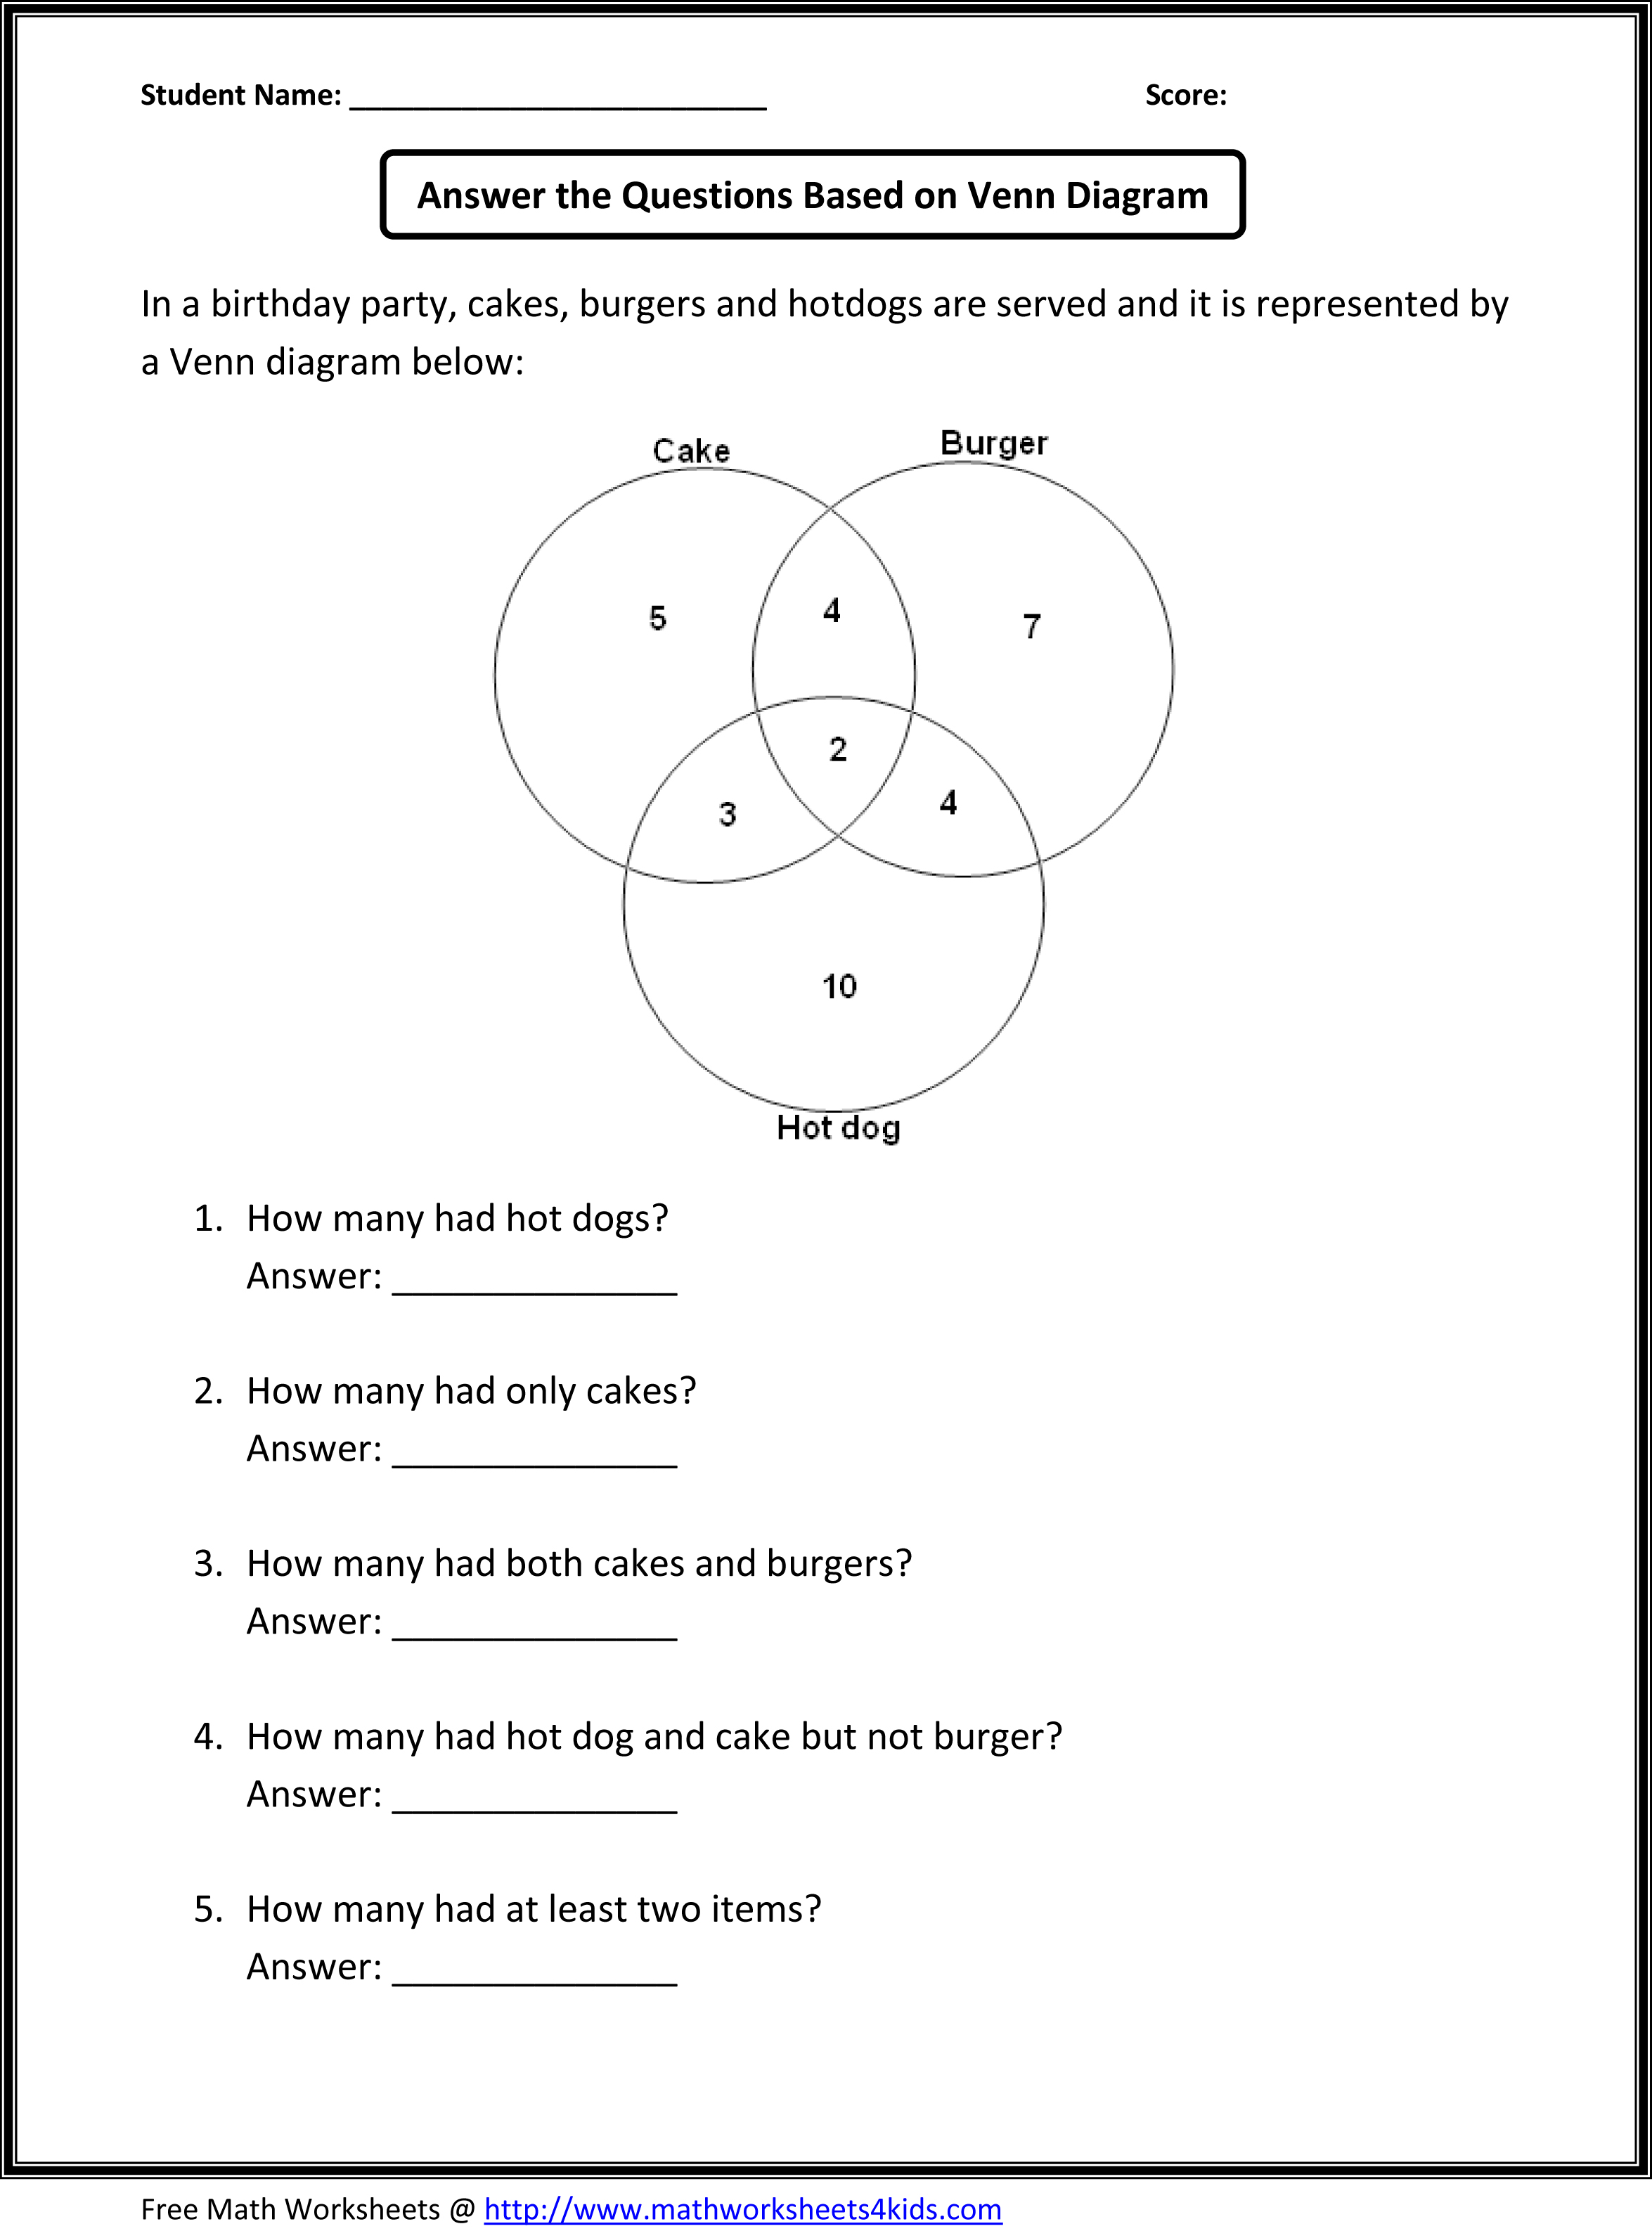 13-best-images-of-temperature-in-drawing-worksheet-fifth-grade-math-worksheets-today-s